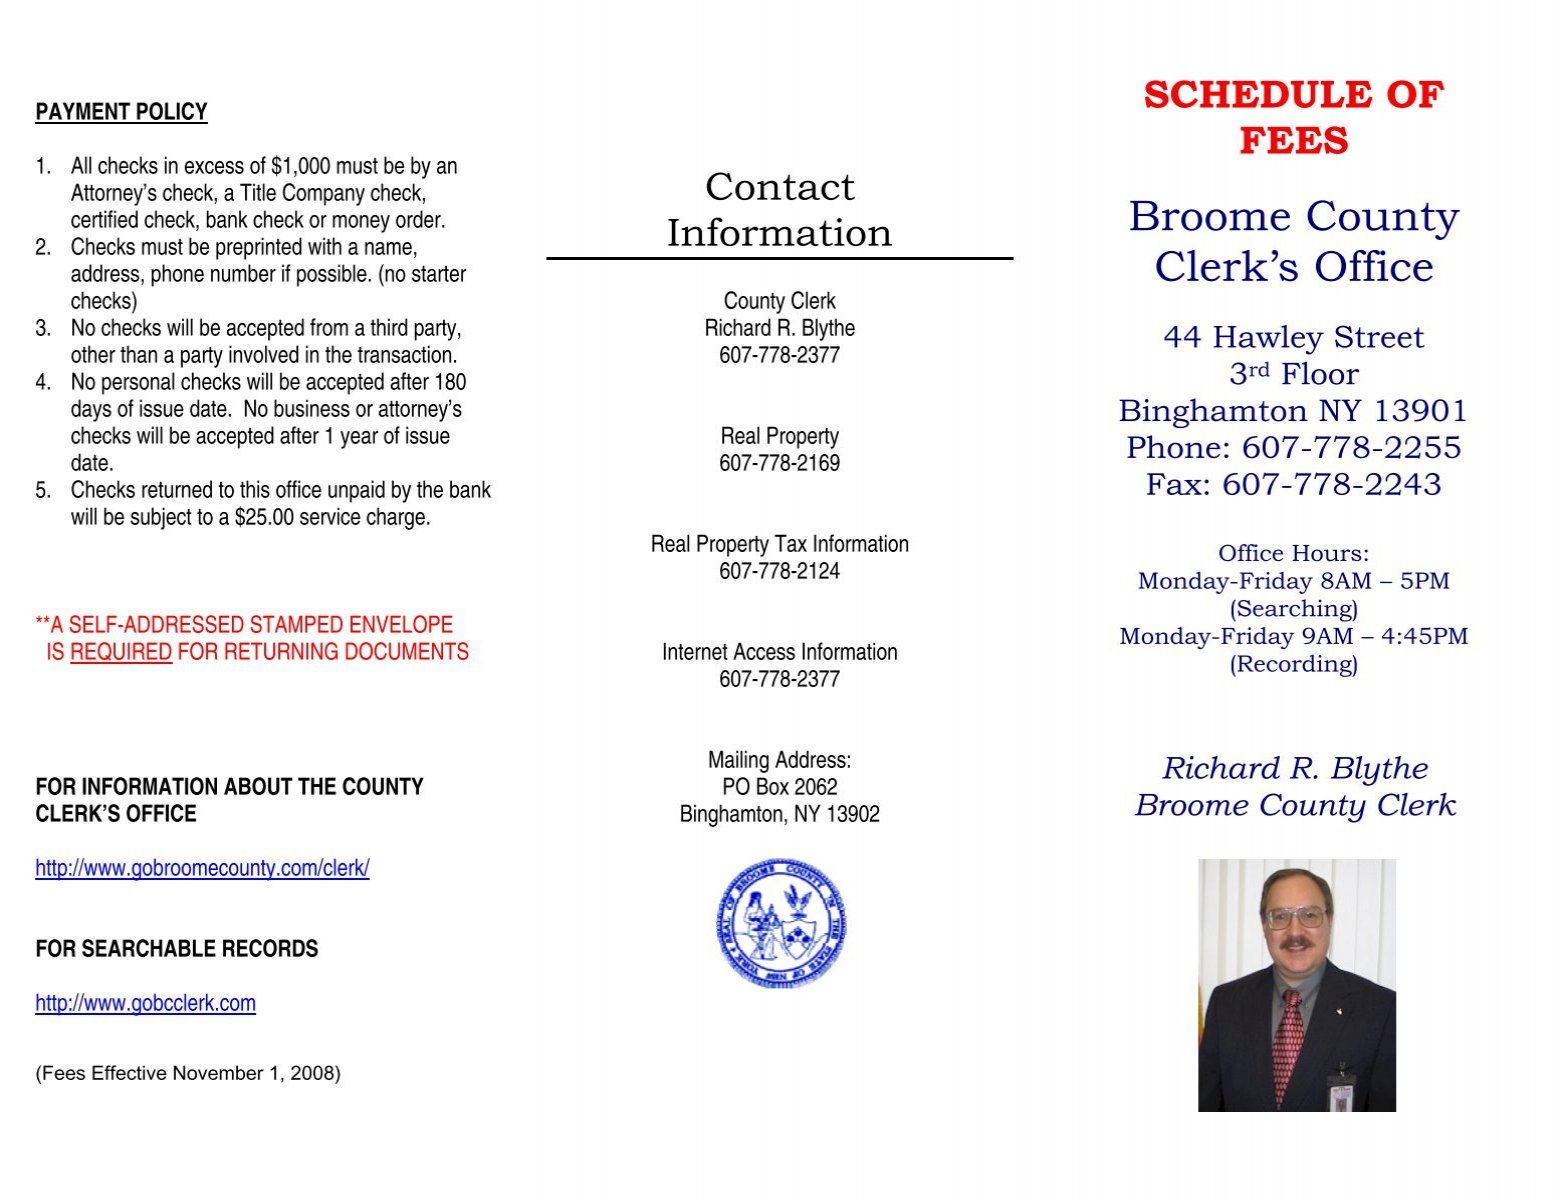 Fee Schedule Broome County